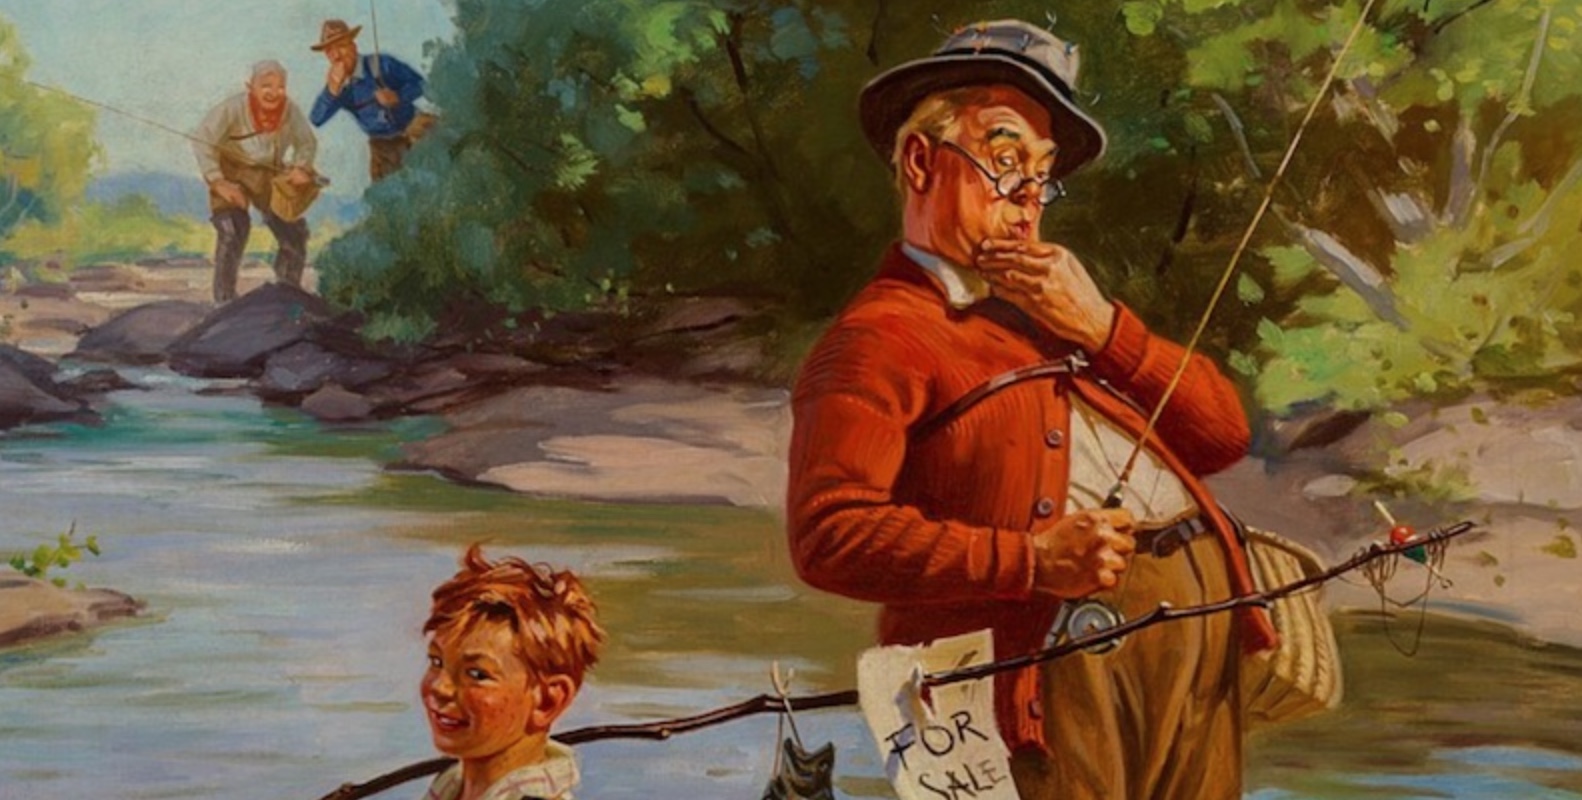 Cast From The Past: Fishing Calendars - Moldy Chum